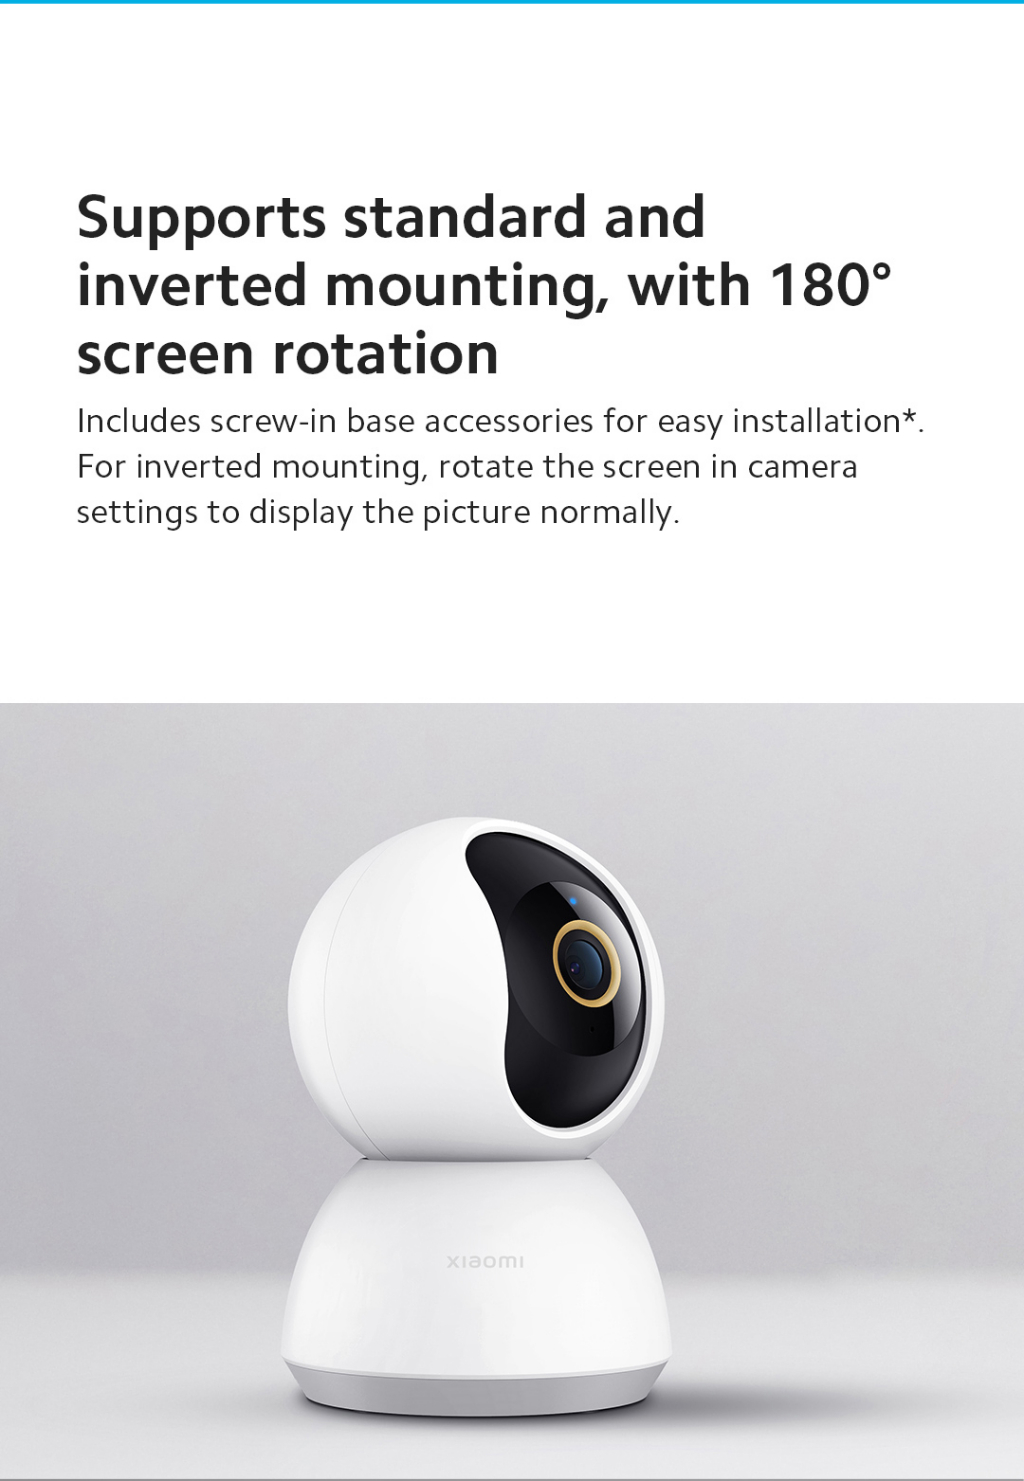  Xiaomi Smart Camera C300, 2K Clarity, 360° Vision, AI Human  Detection, F1.4 Large Aperture and 6P Lens, Enhanced Color Night Vision in  Low Light, Full Encryption for Privacy Protection, White 